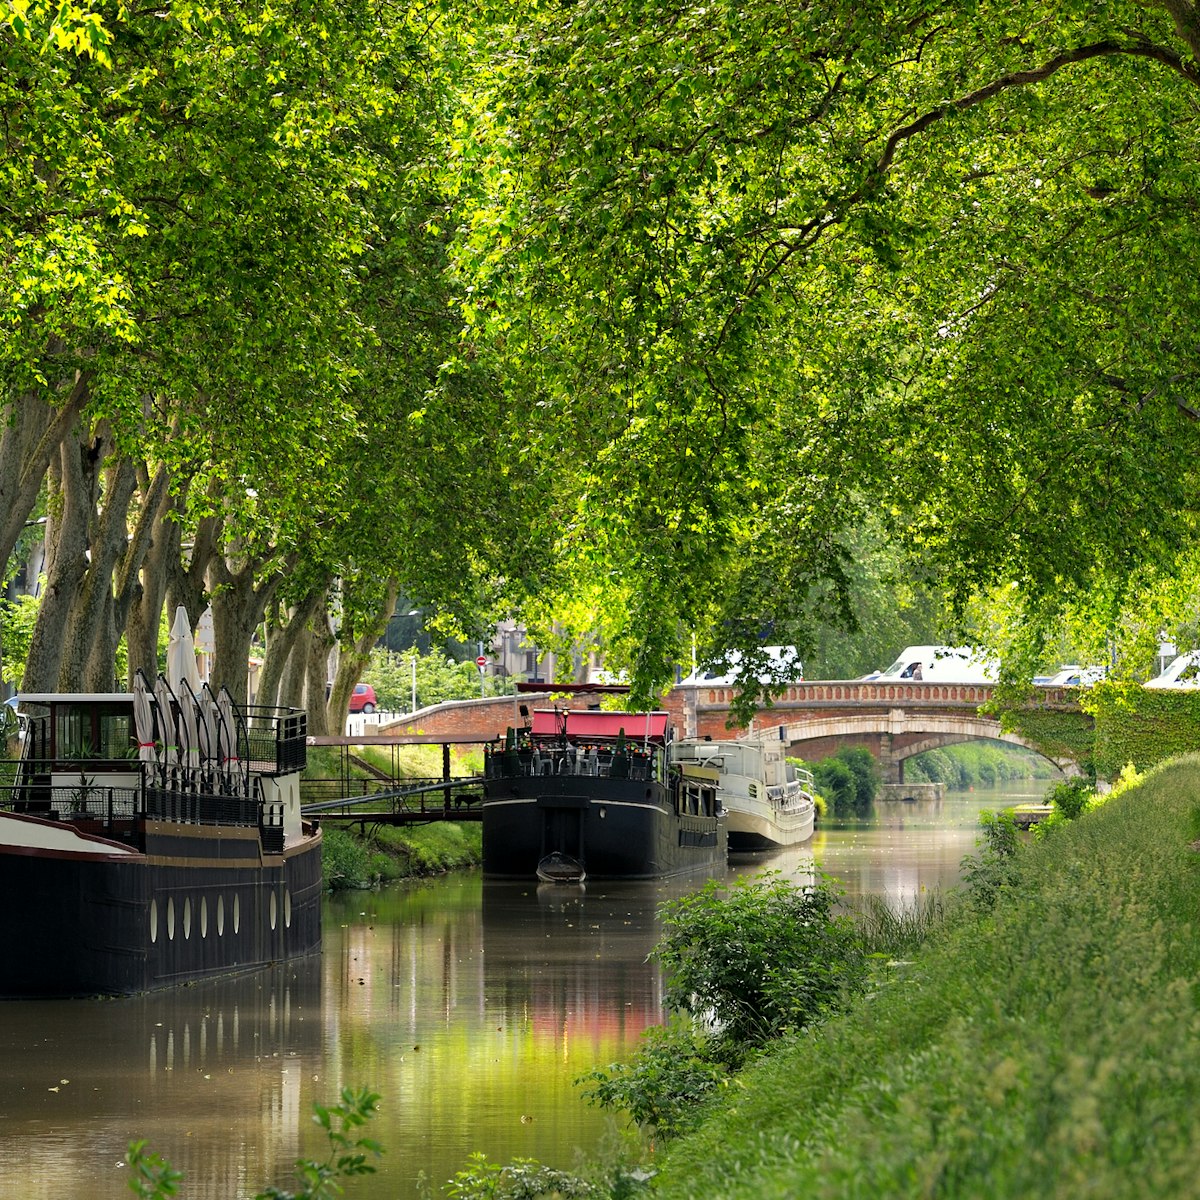 The canal of midi in Toulouse, France.